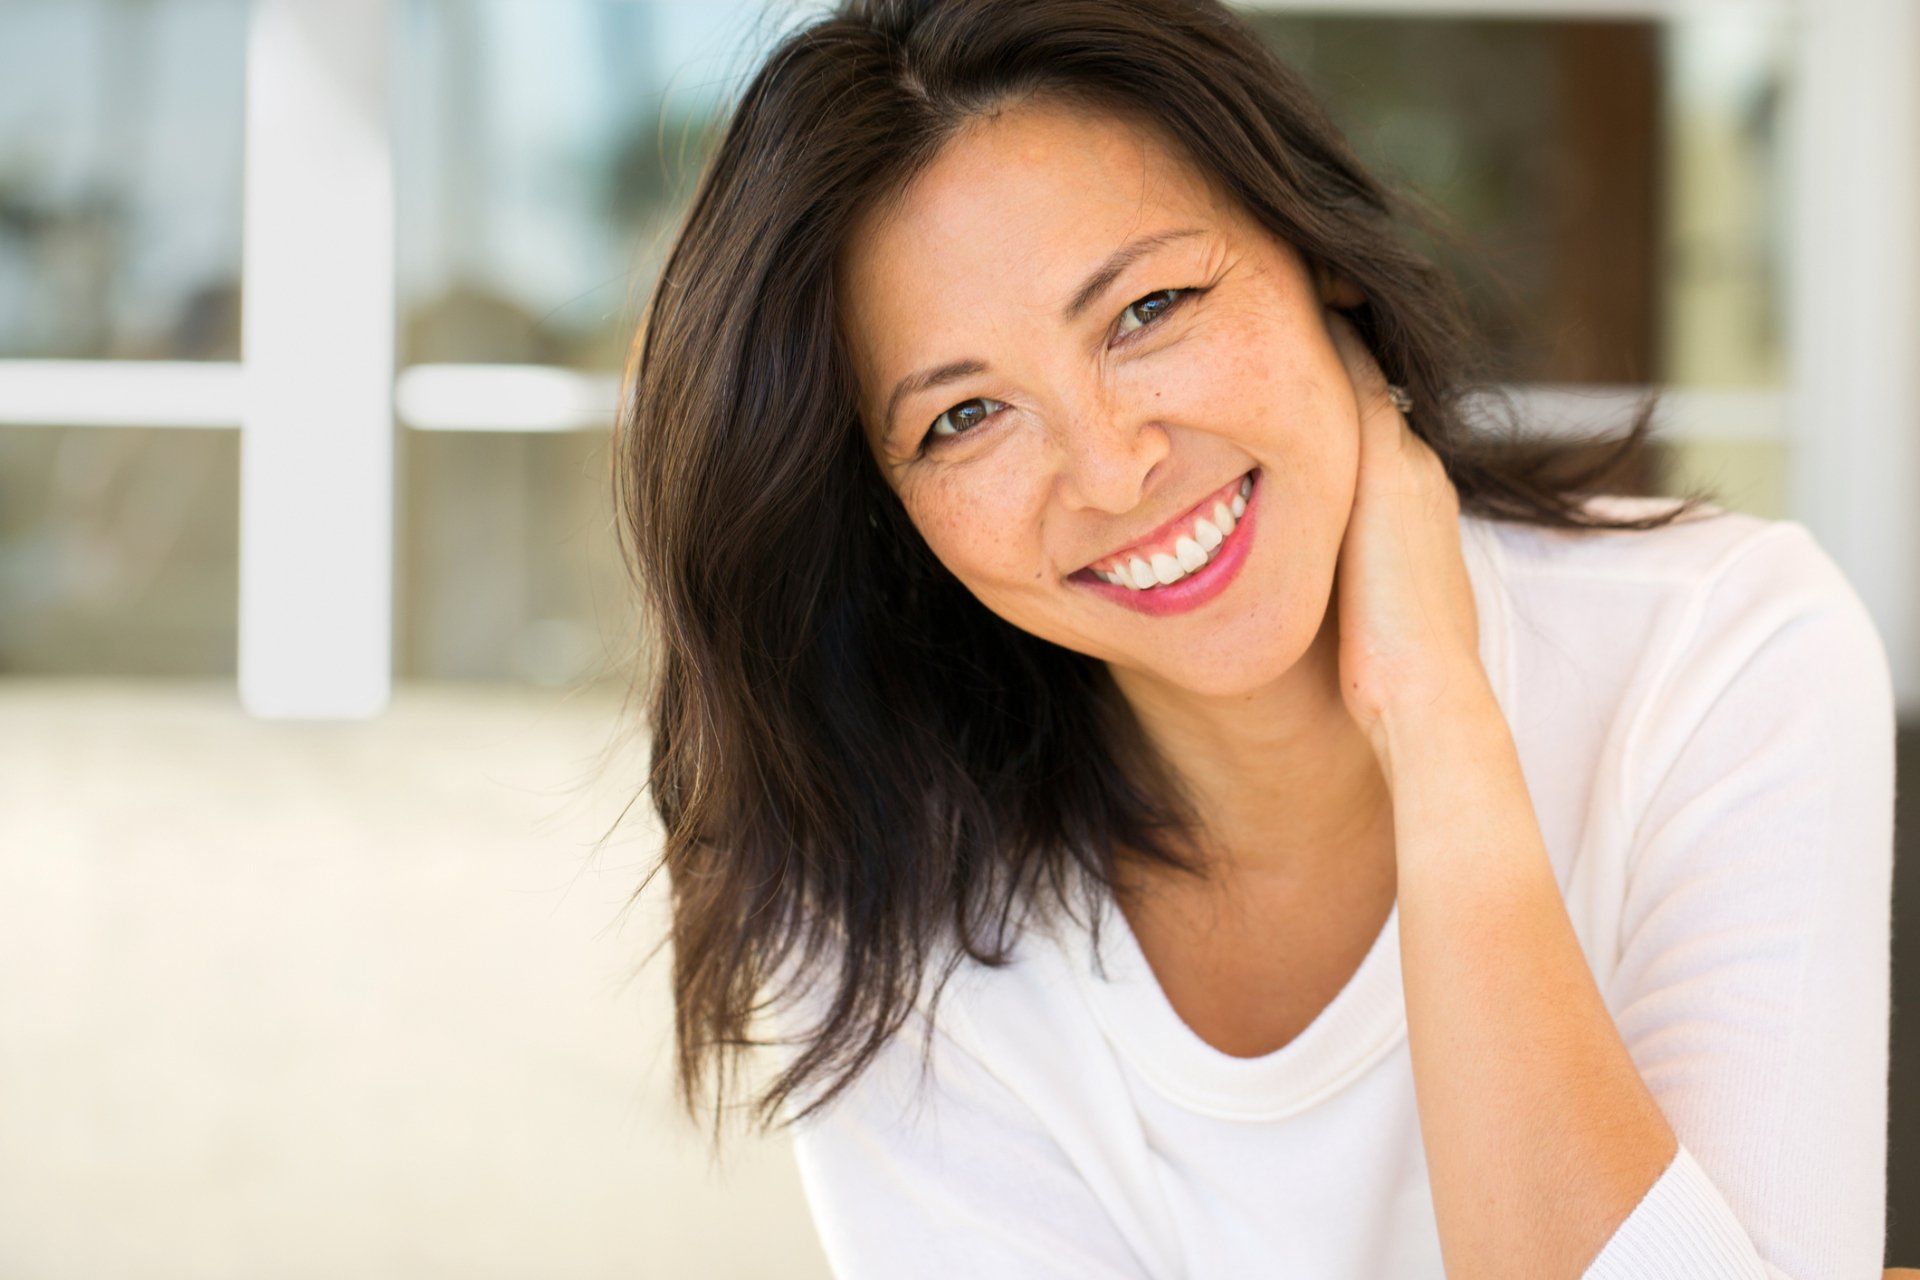 Smart confident Asian woman smiling peacefully